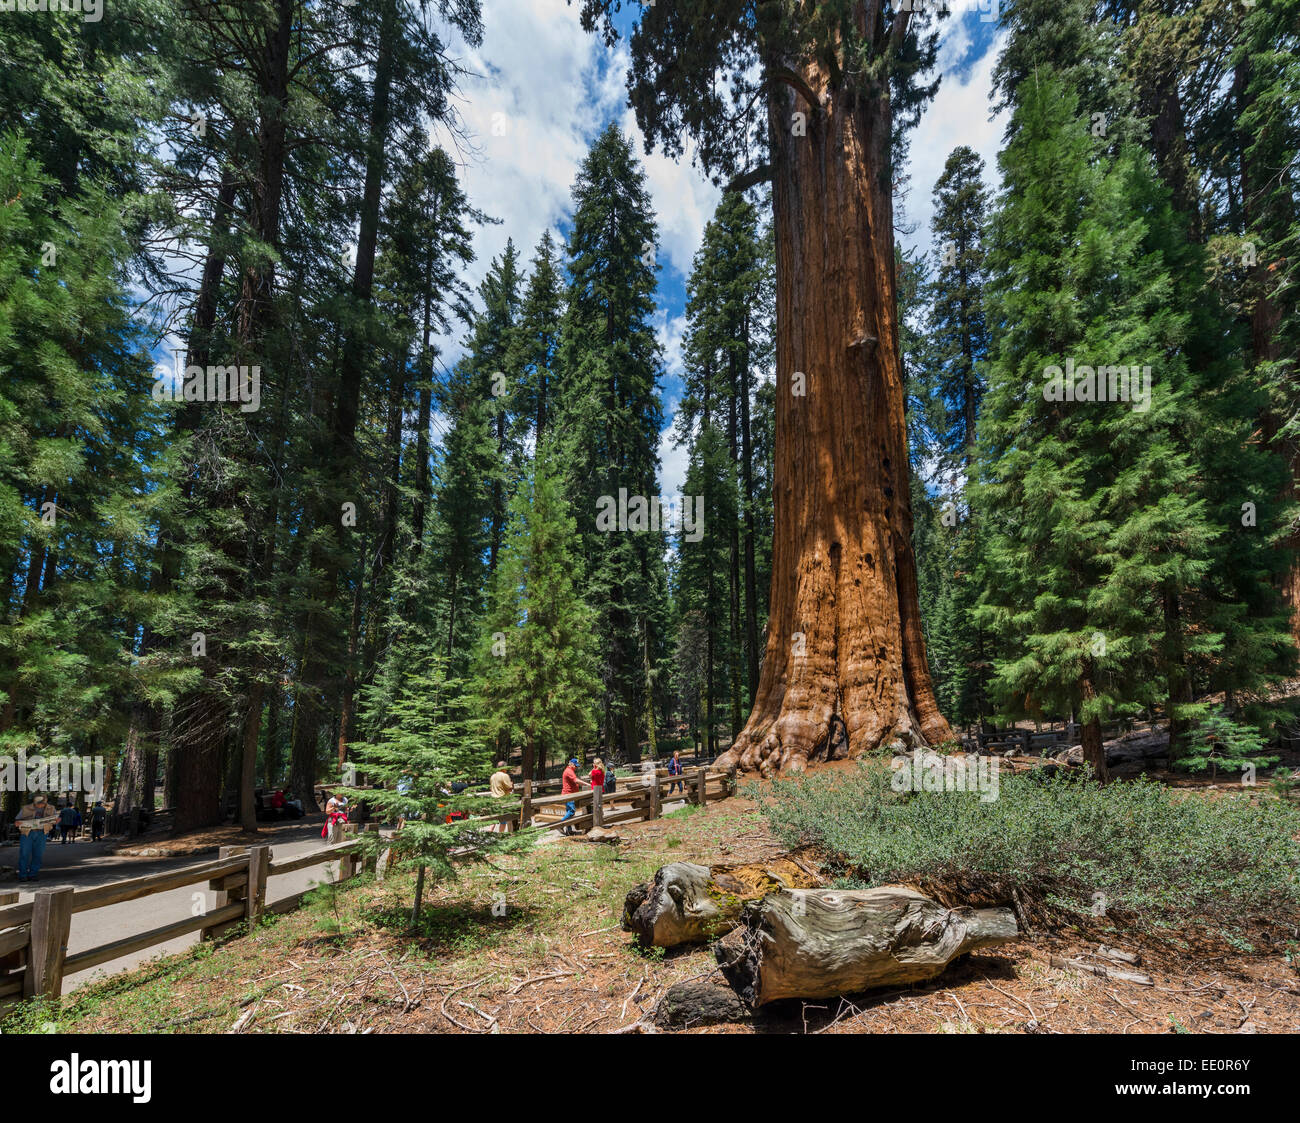 Tourists in front of General Sherman Tree, one of biggest in the world, Sequoia National Park, Sierra Nevada, California, USA Stock Photo